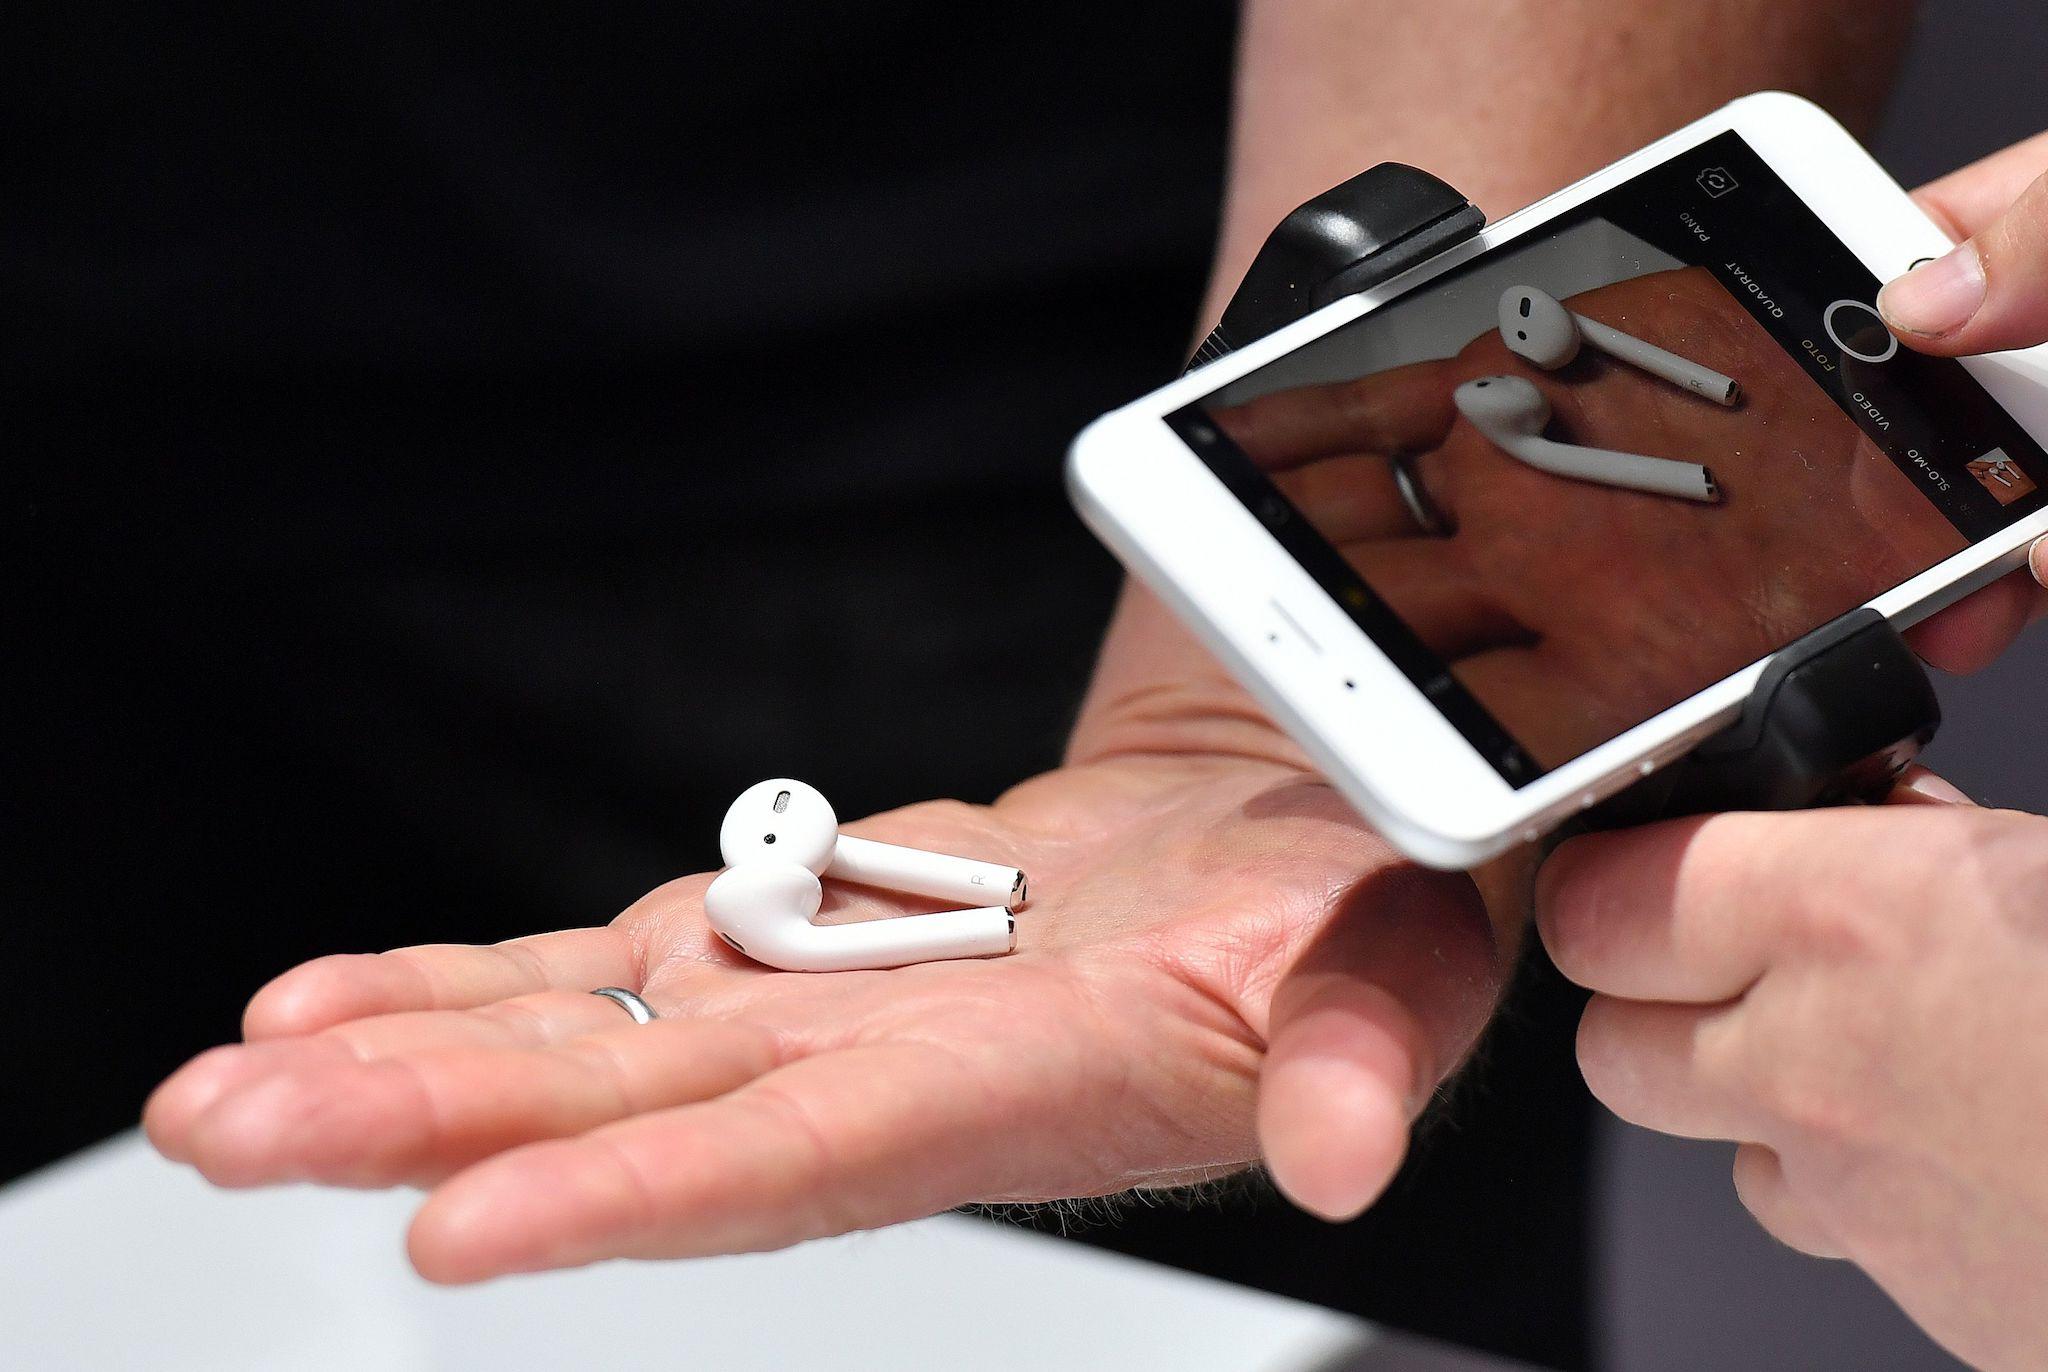 A person takes a photo of a set of wireless Apple AirPods during a media event at Bill Graham Civic Auditorium in San Francisco